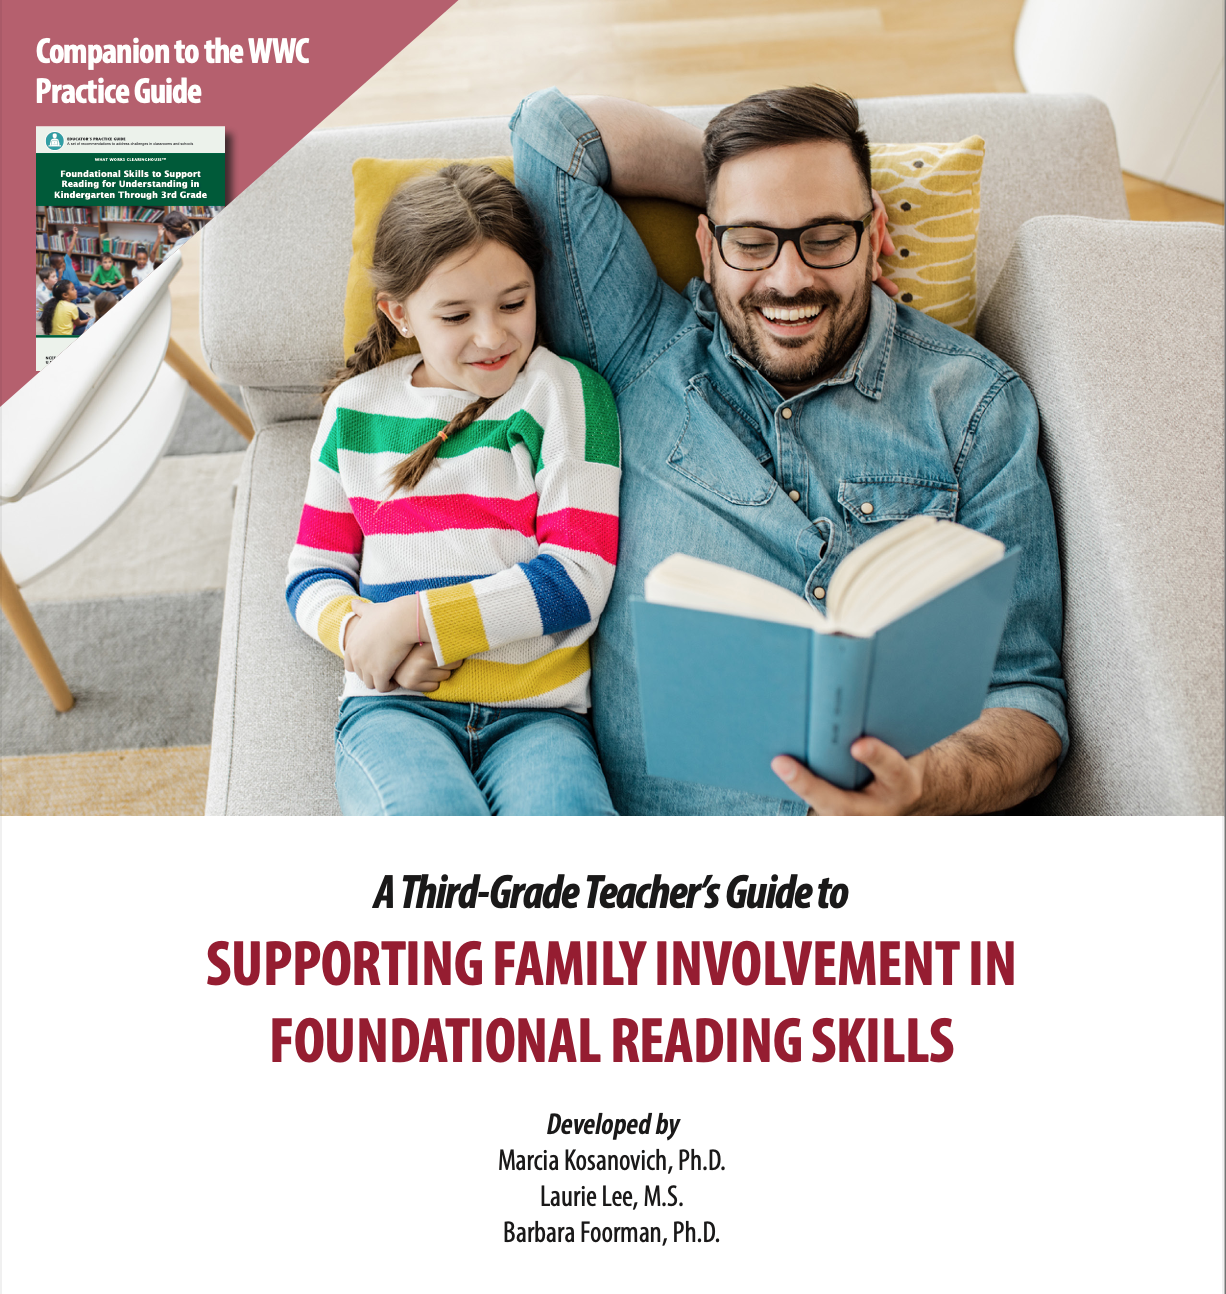 Cover of resource with title and man reading to child on the couch